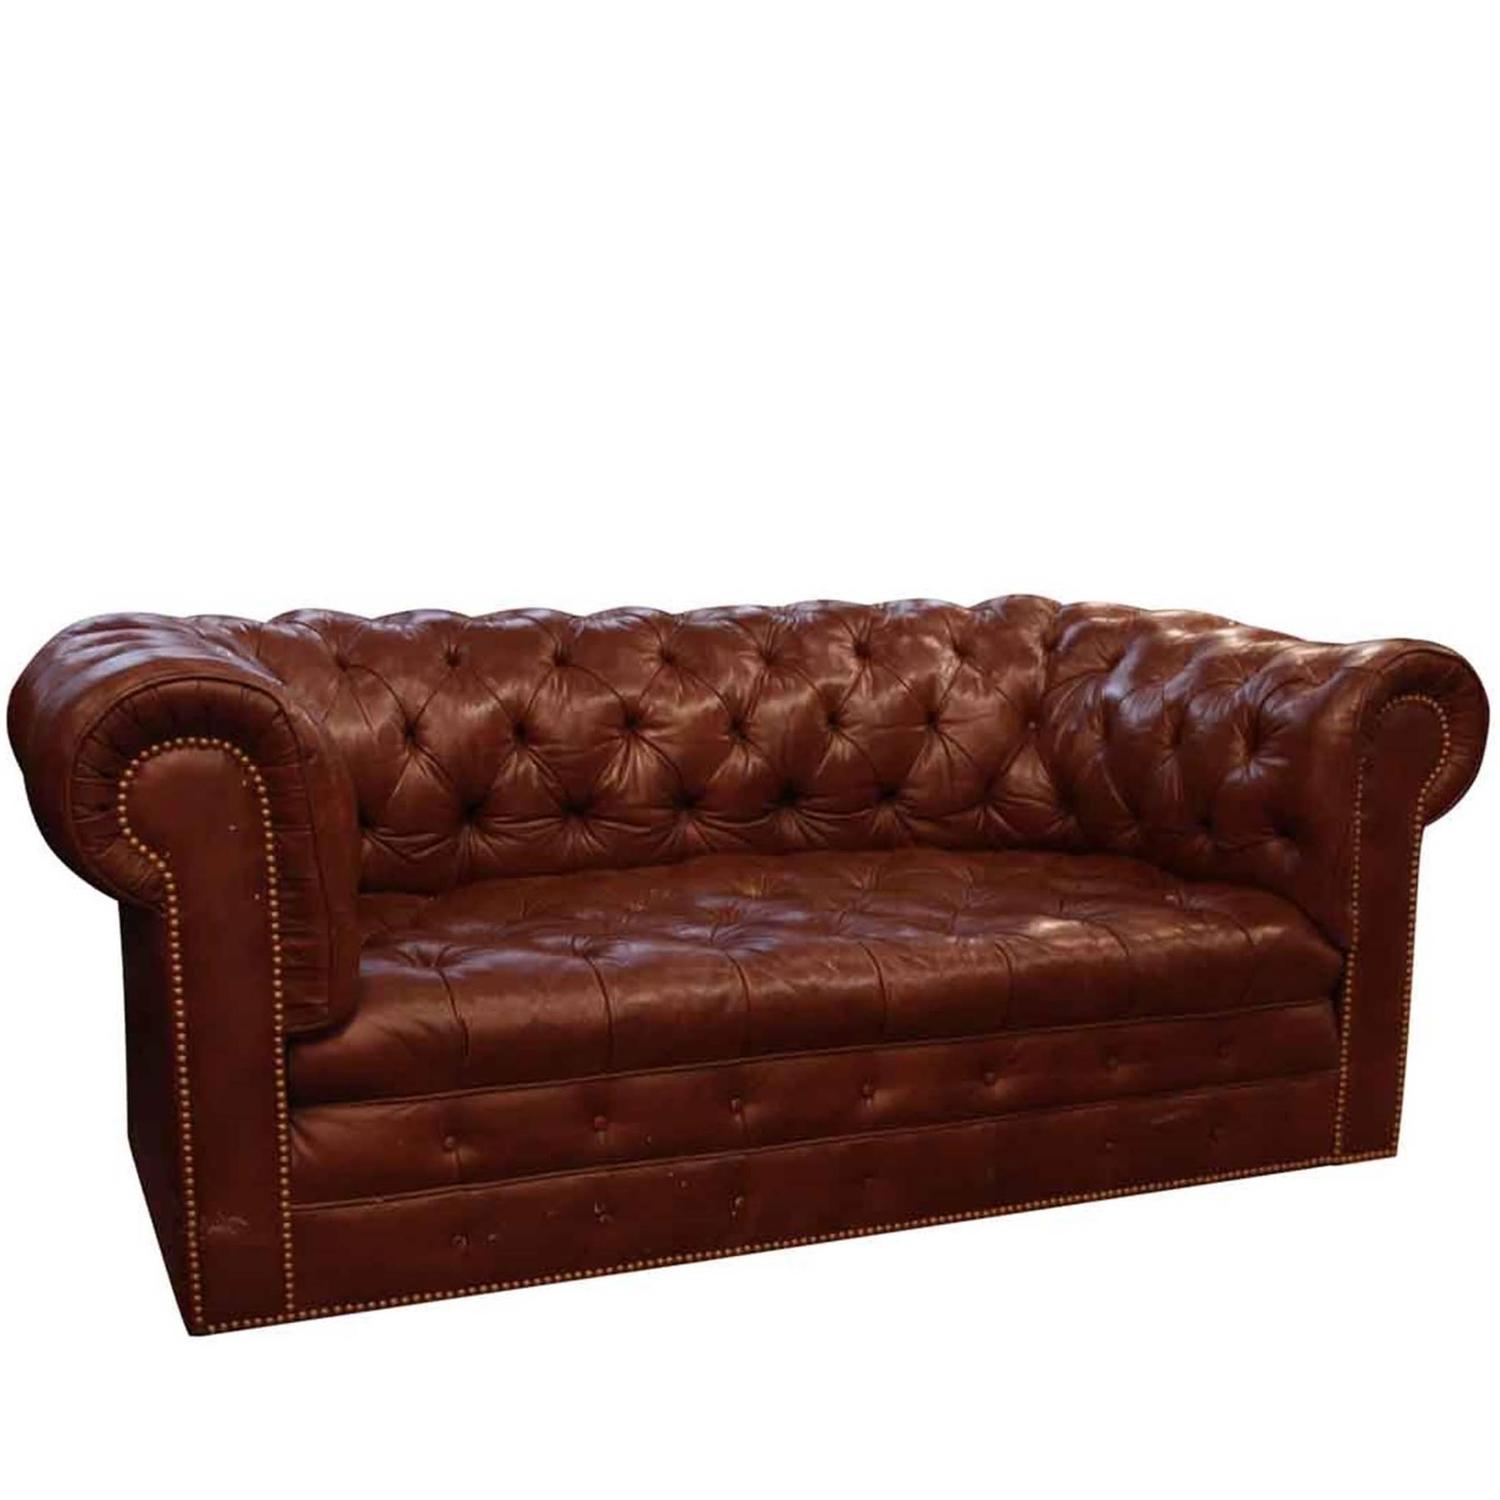 1970s Brown Chesterfield Leather Sofa With Brass Rivets By Hancock